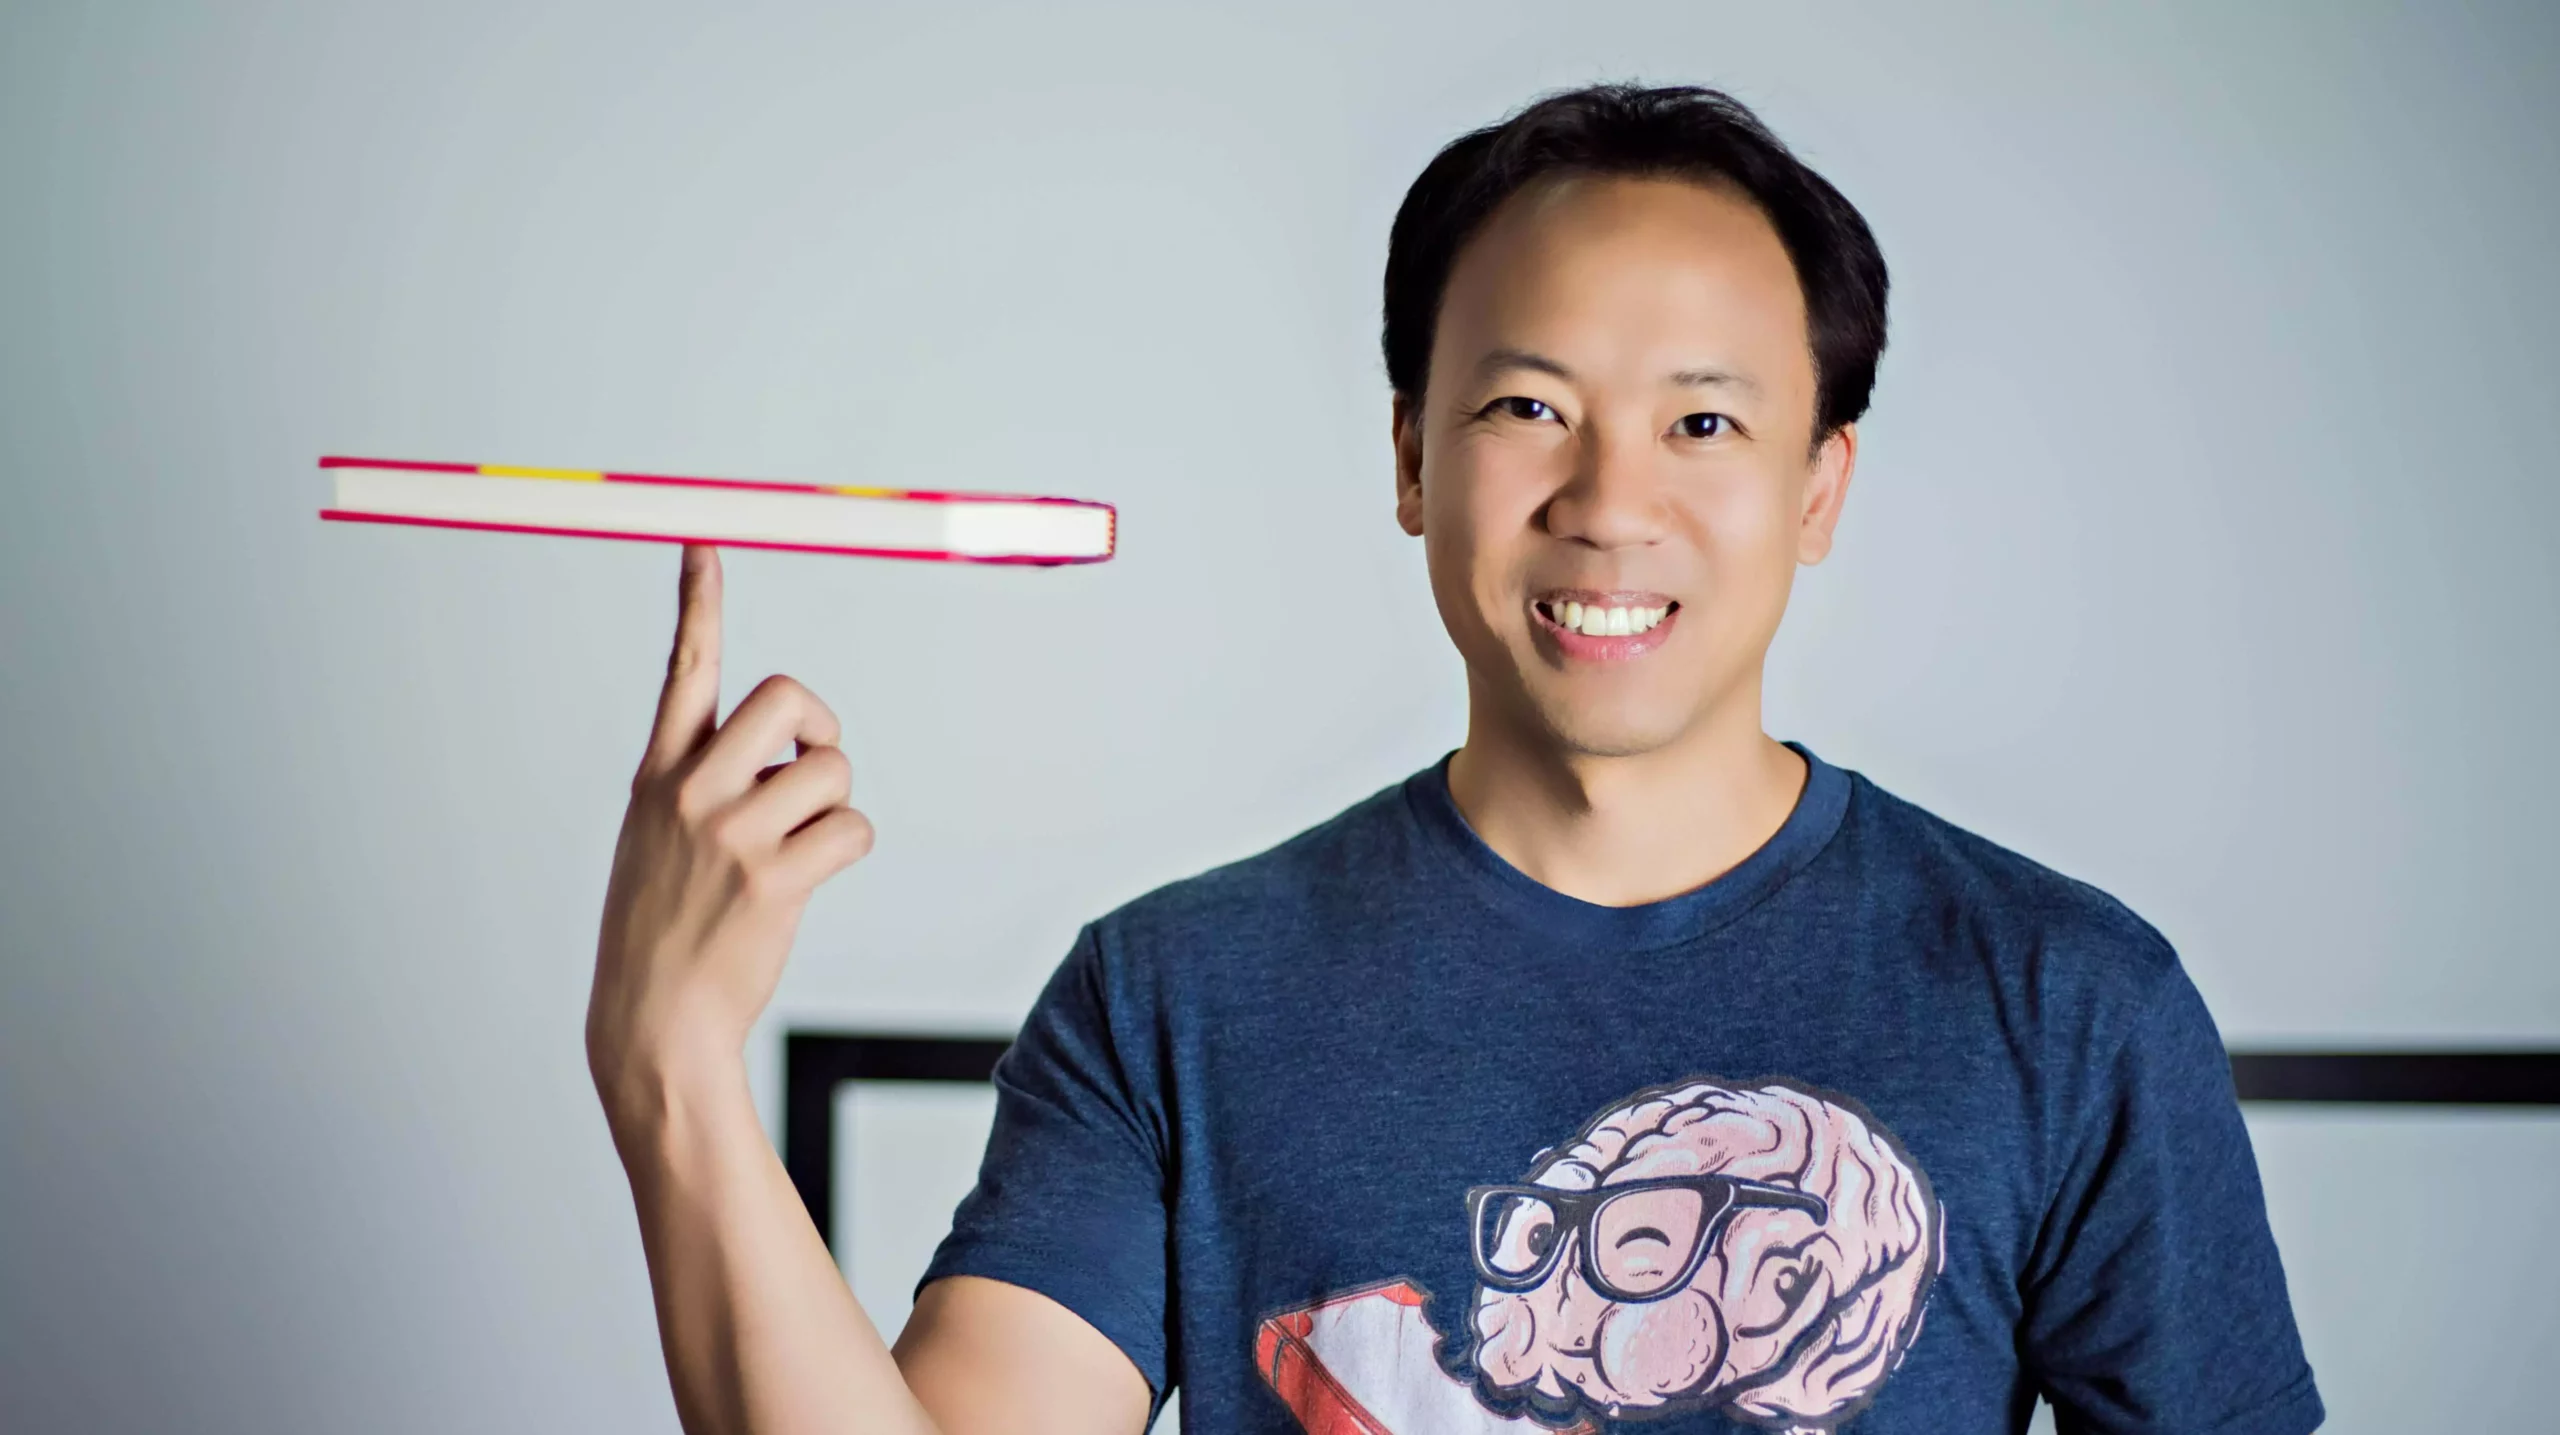 Jim Kwik, brain performance coach and trainer of Mindvalley's Superbrain Quest